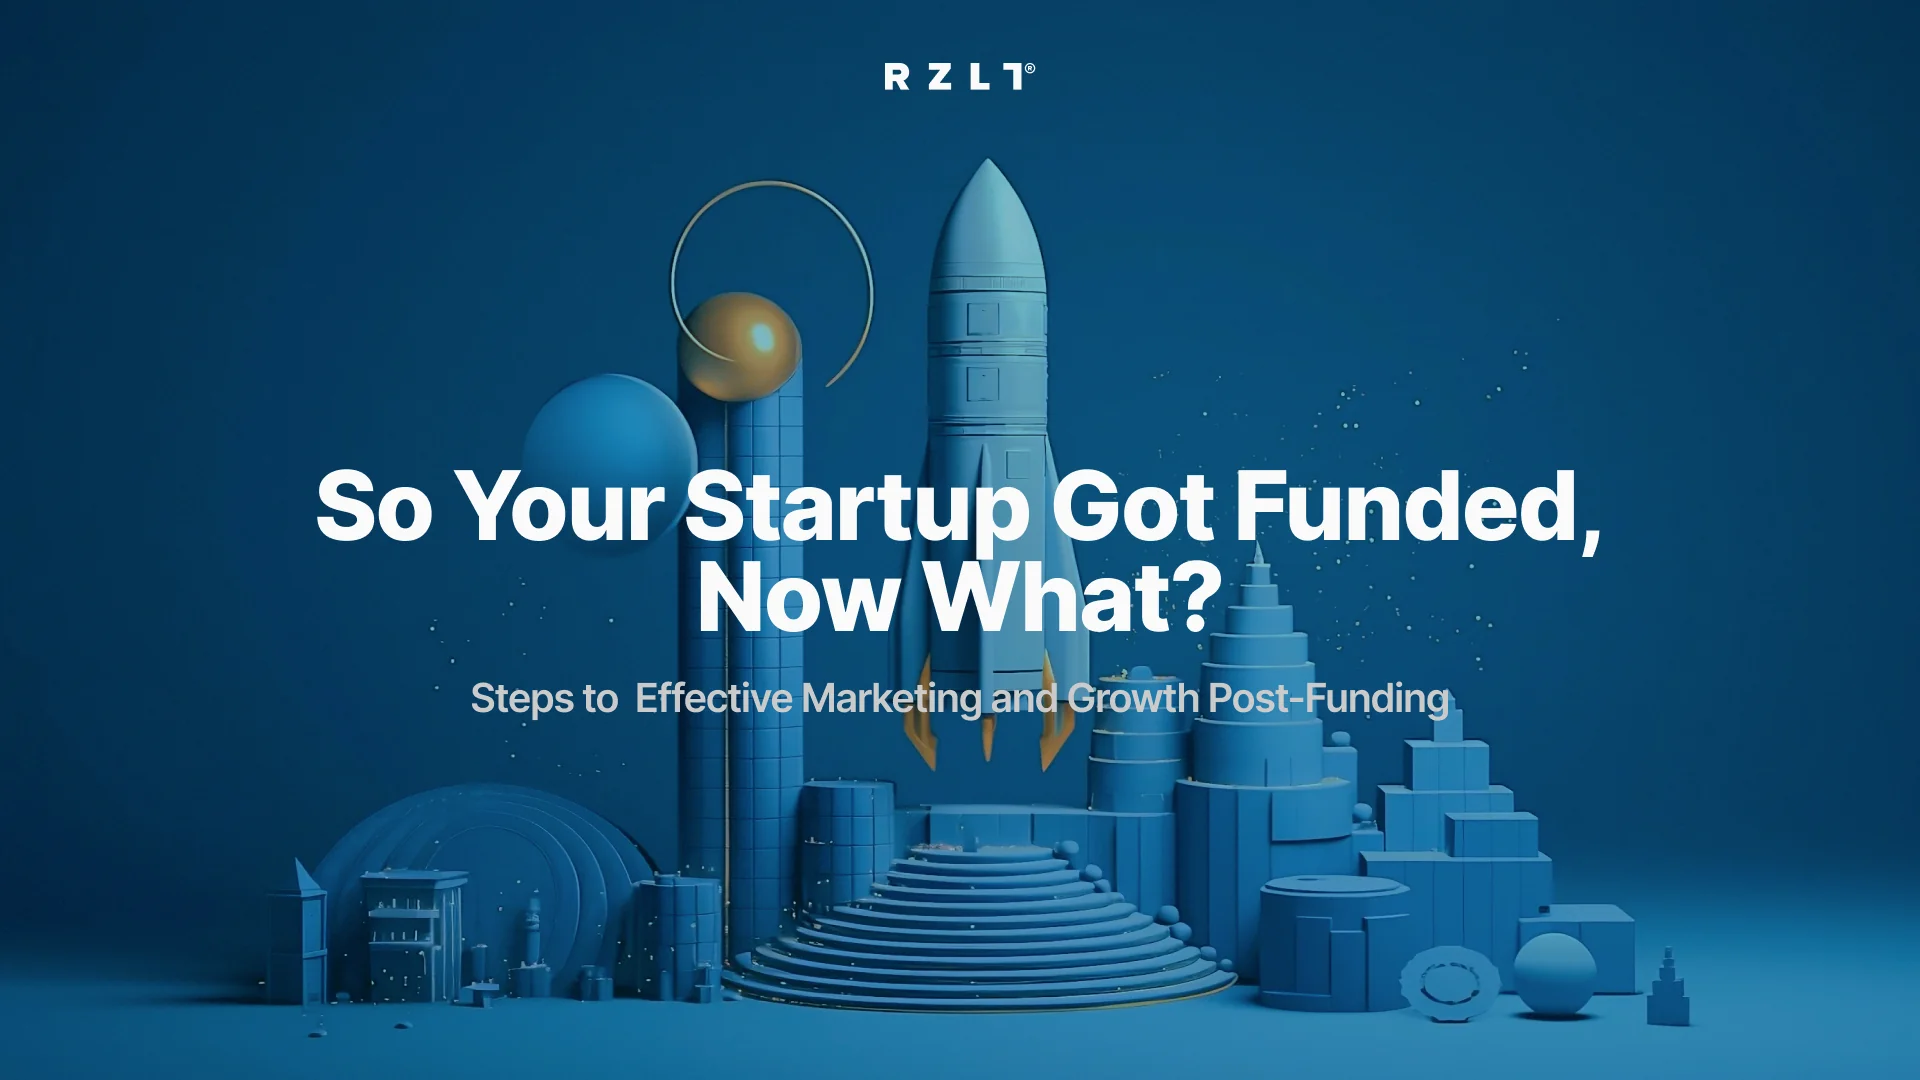 So Your Startup Got Funding Now What